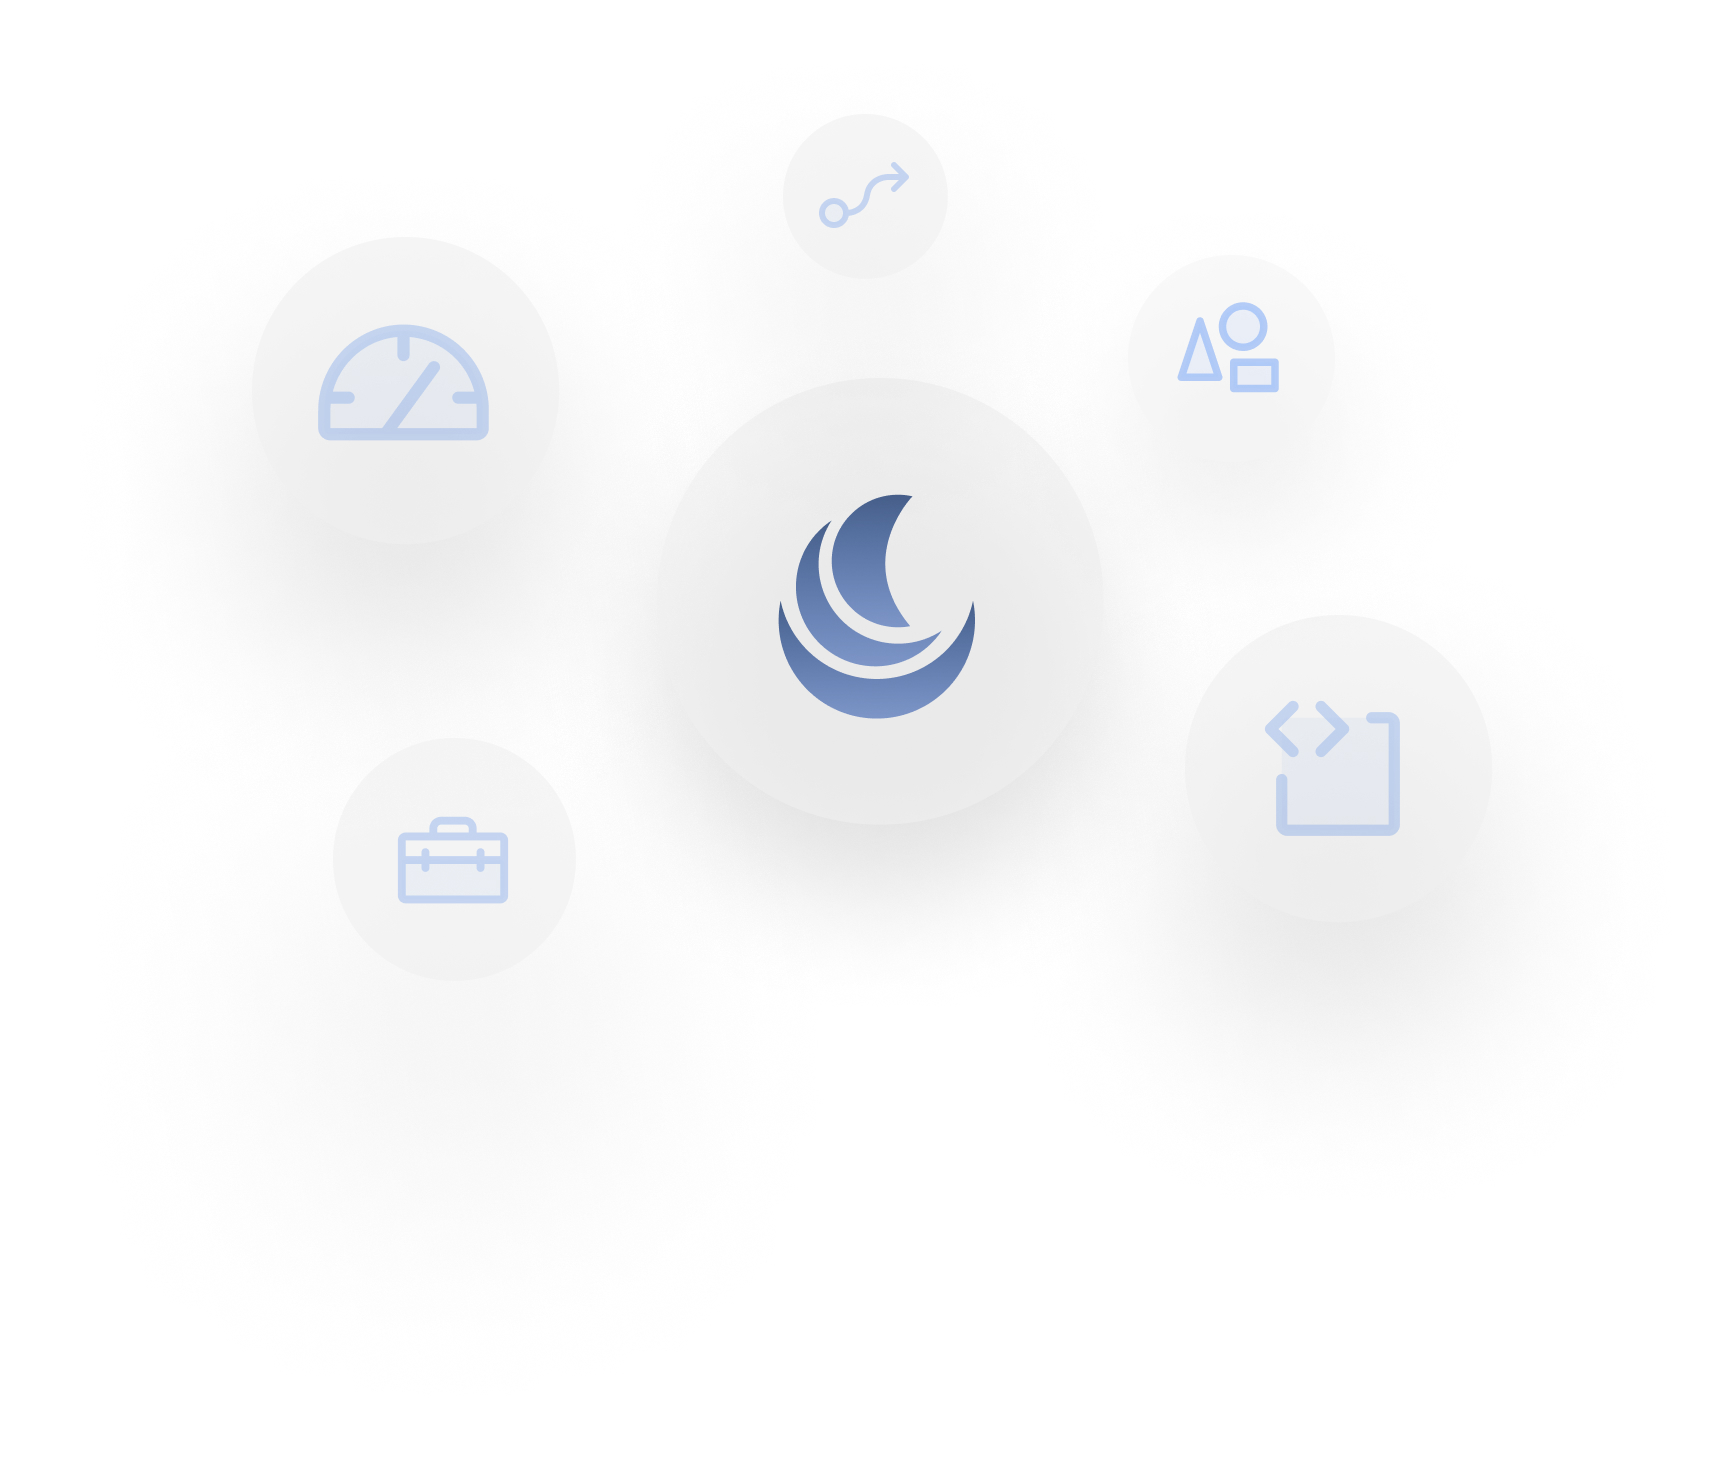 Fira logo surrounded by service icons